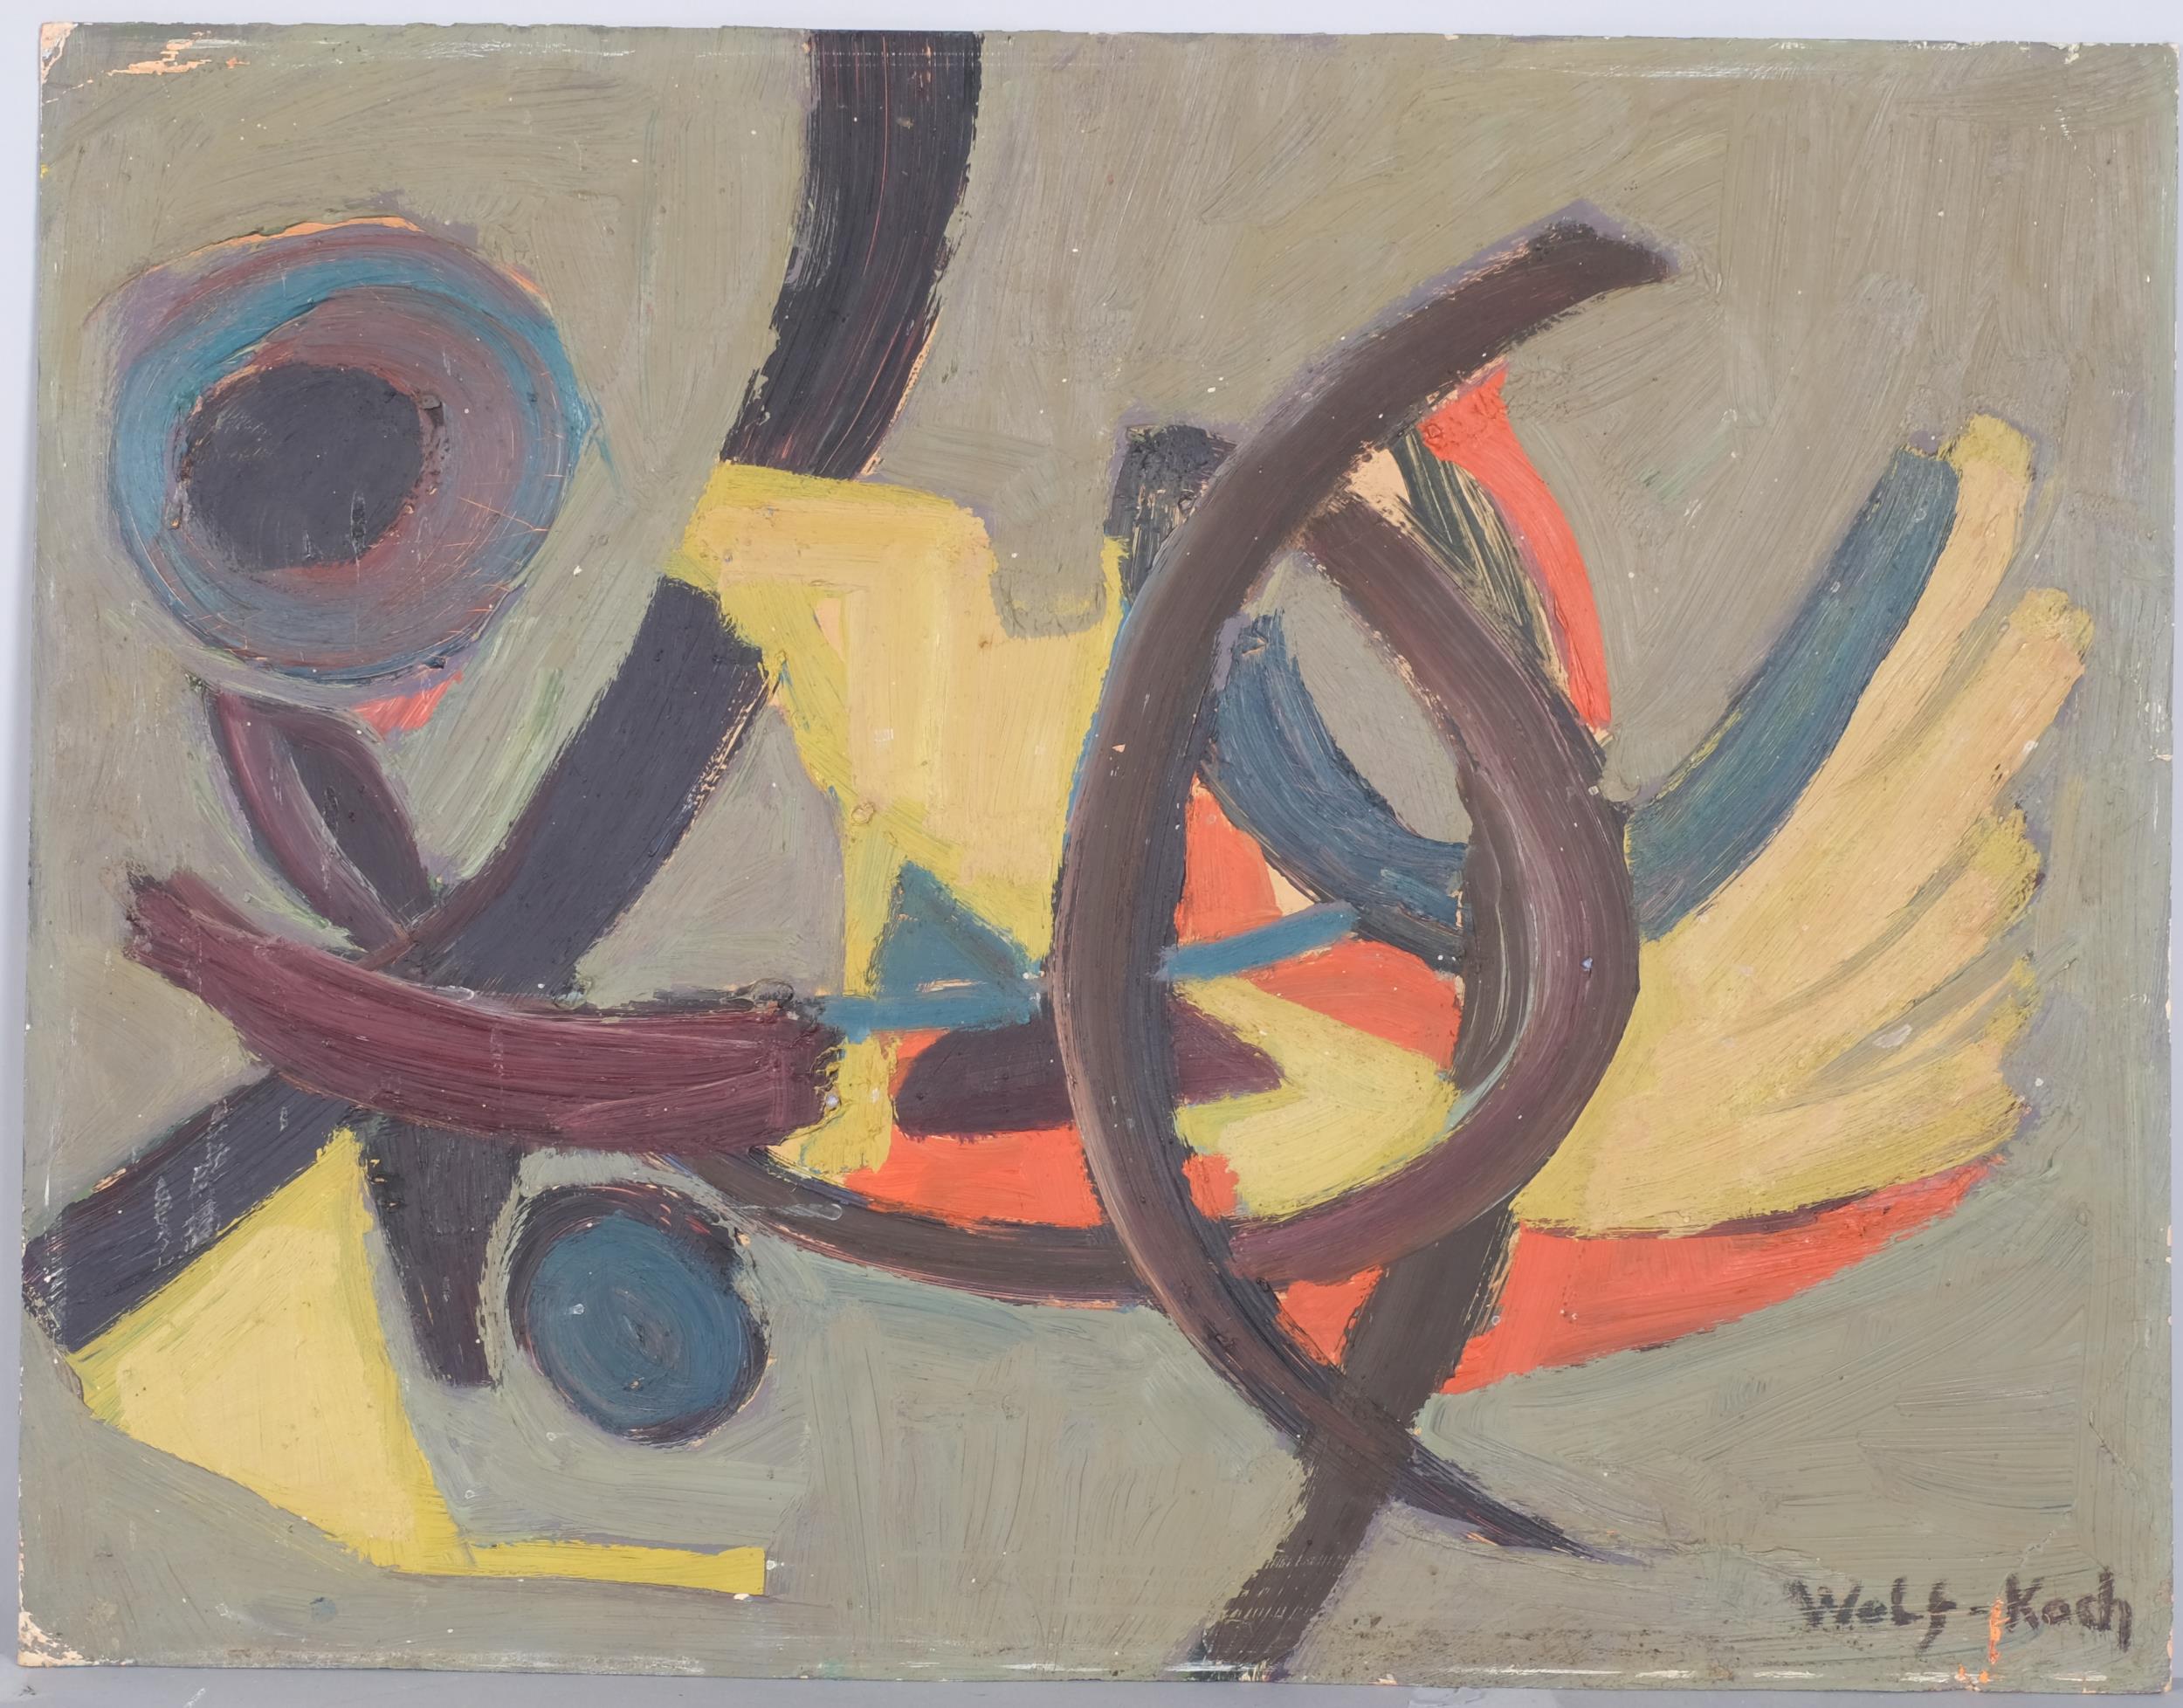 Lotte Wolf-Koch (1909 - 1977), abstract composition, oil on board, signed, 38cm x 49cm, unframed